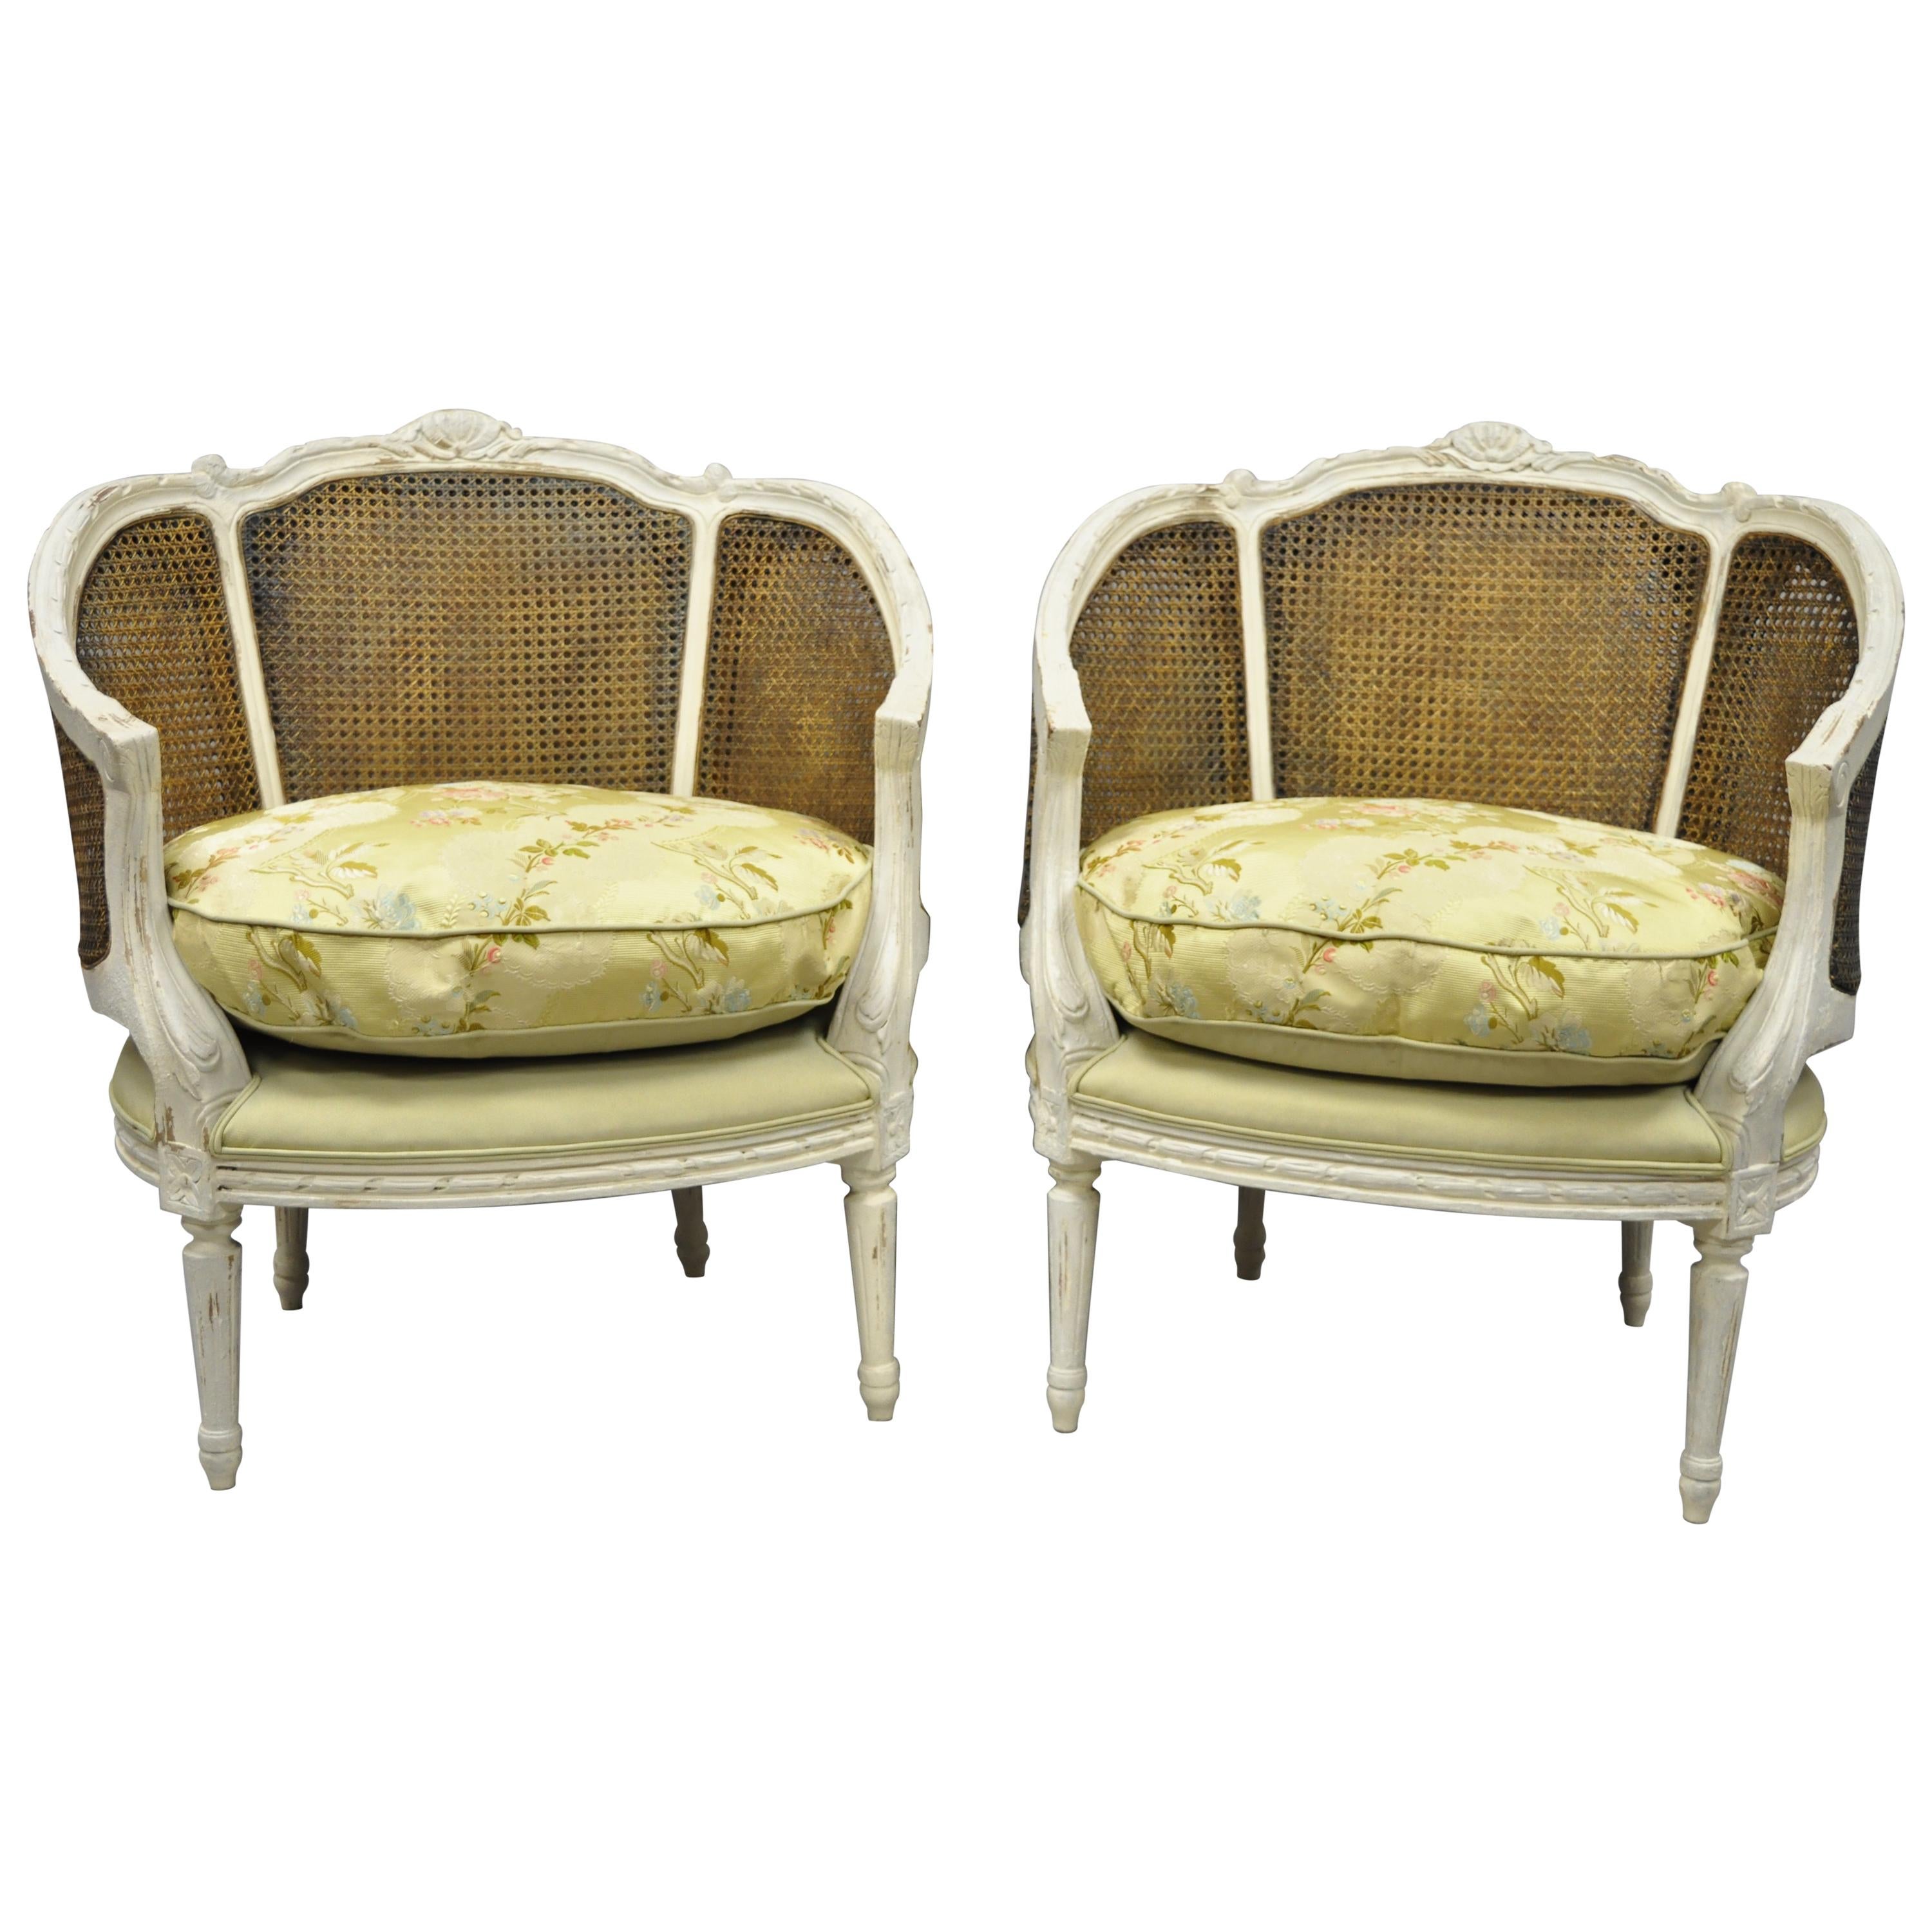 Pair of Caned French Louis XVI Style White Distress Painted Bergere Salon Chairs